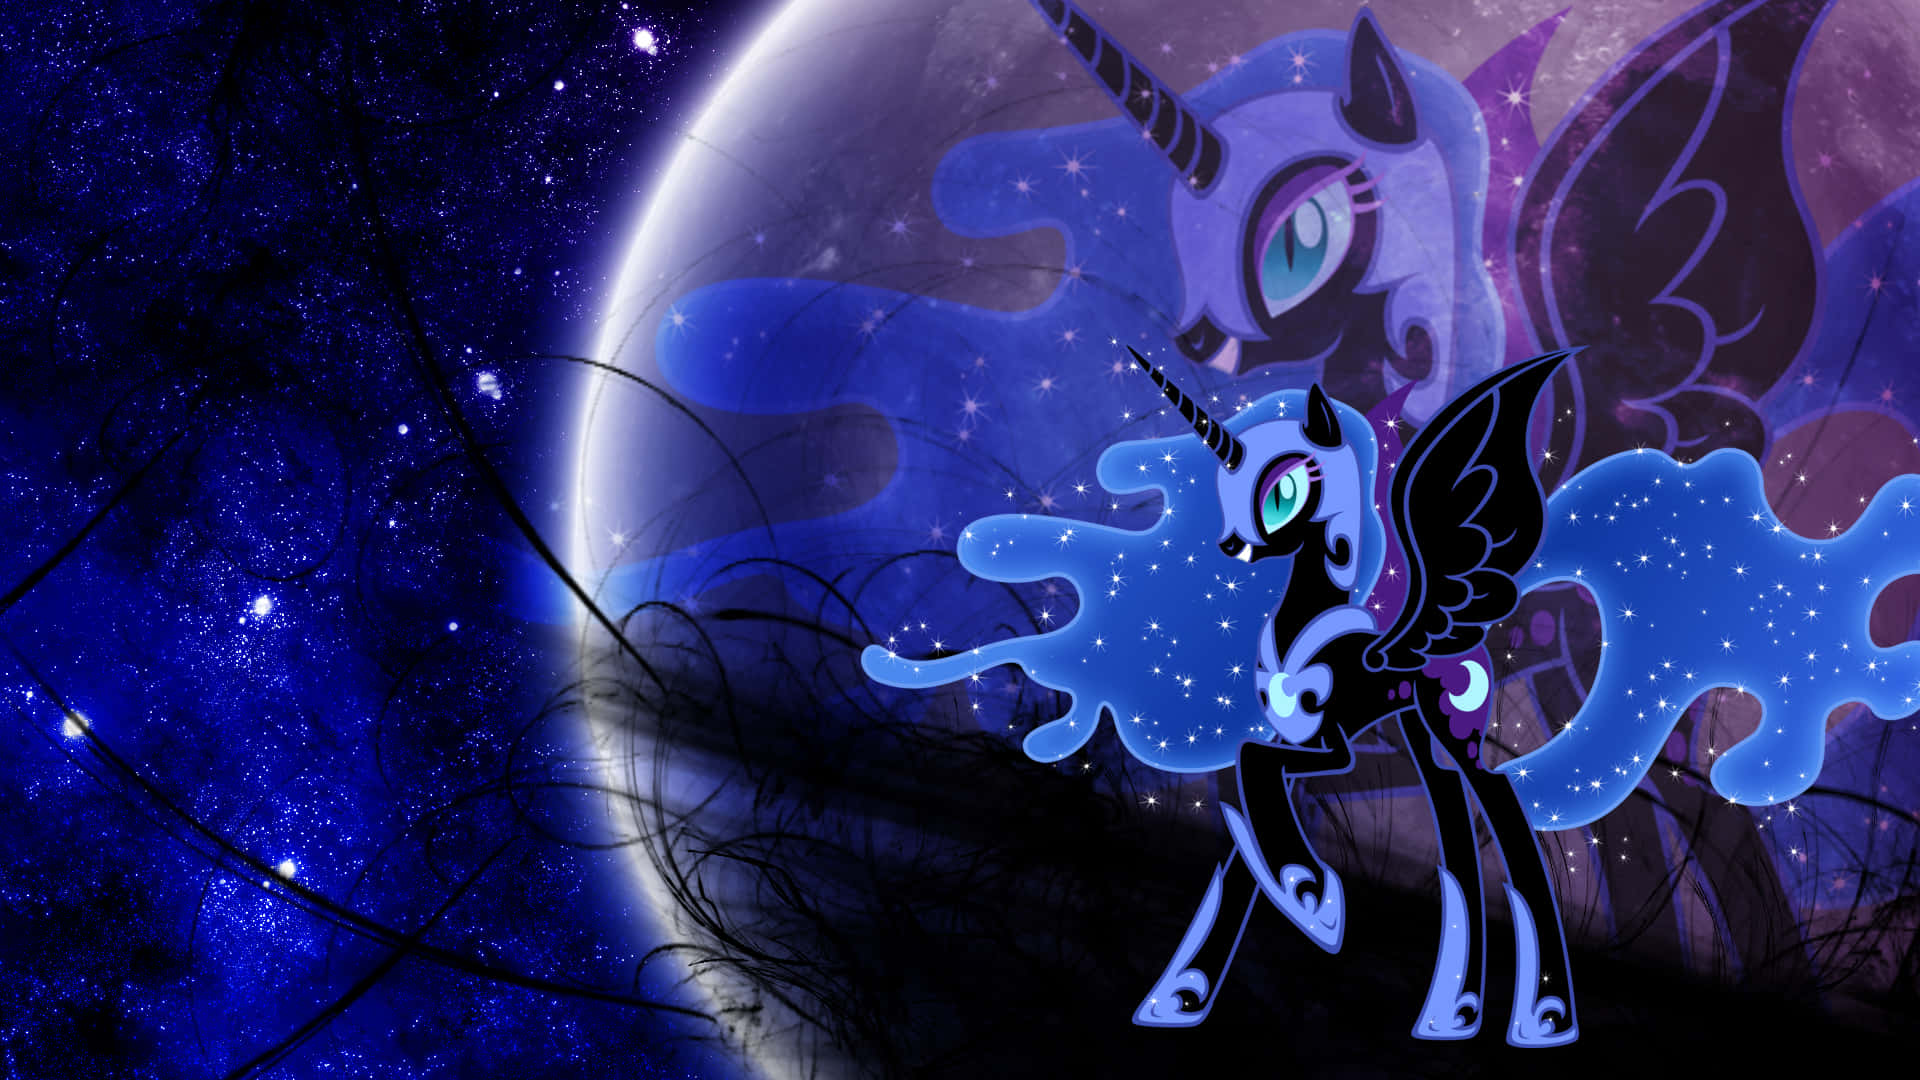 Outlined Against A Cloudless Night Sky, Nightmare Moon Creates Fear And Dread